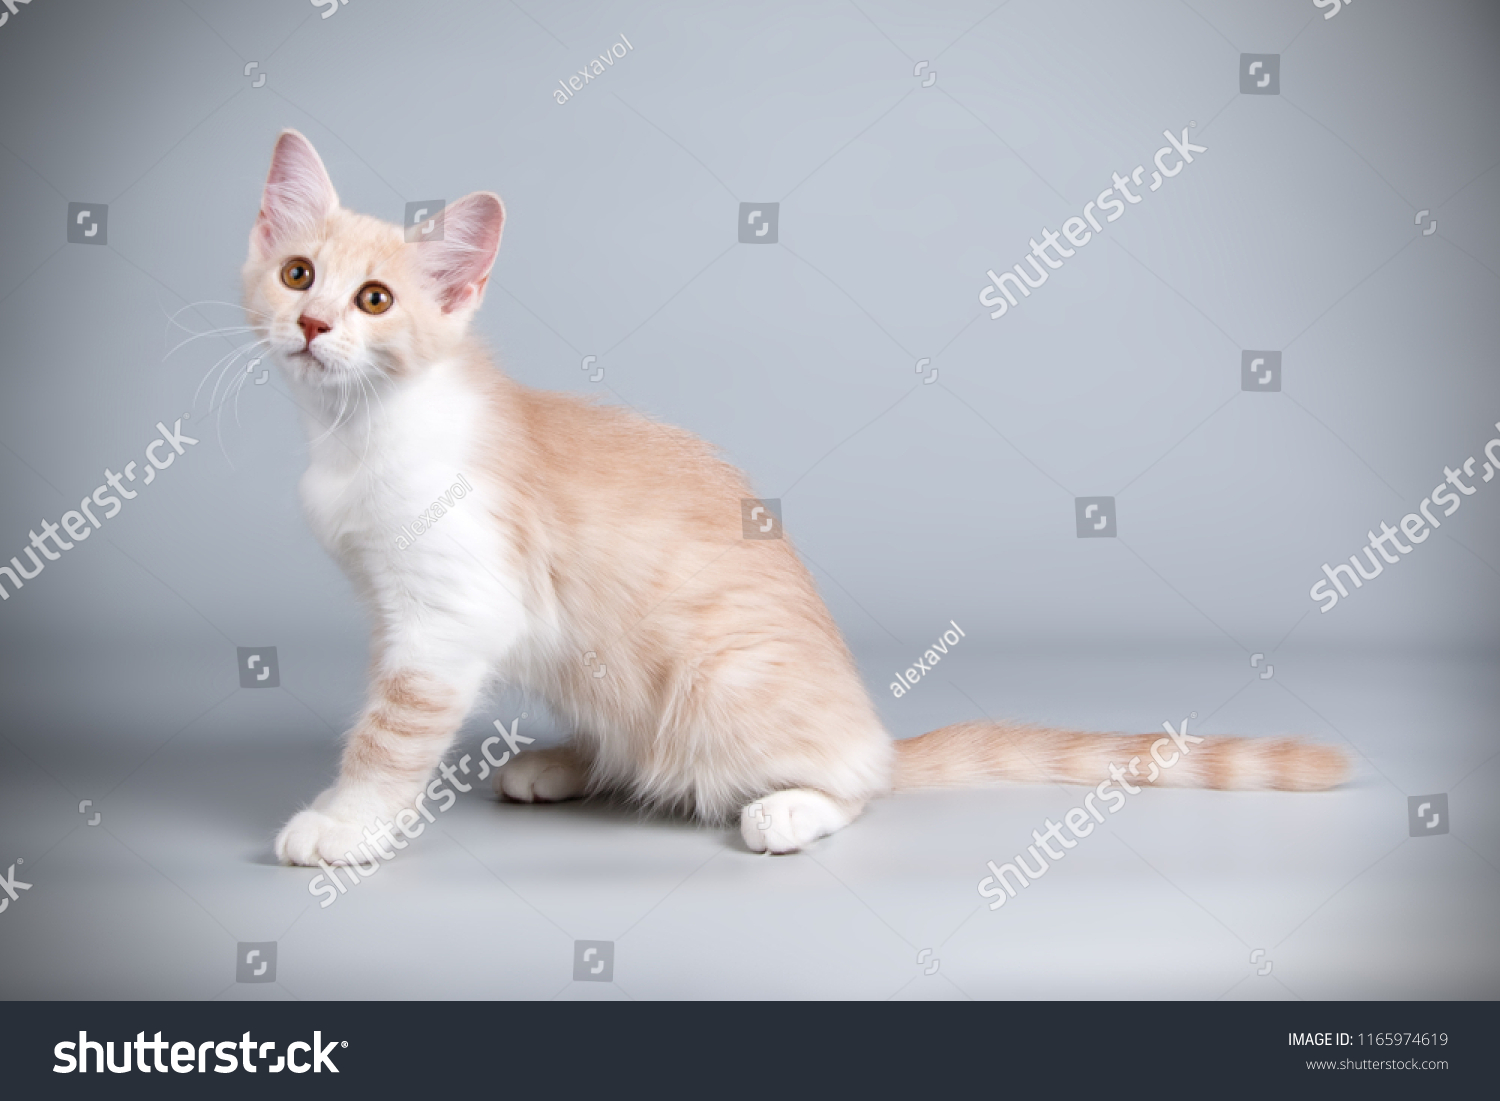 Aphrodite Giant Cat On Colored Backgrounds Stock Photo Edit Now 1165974619